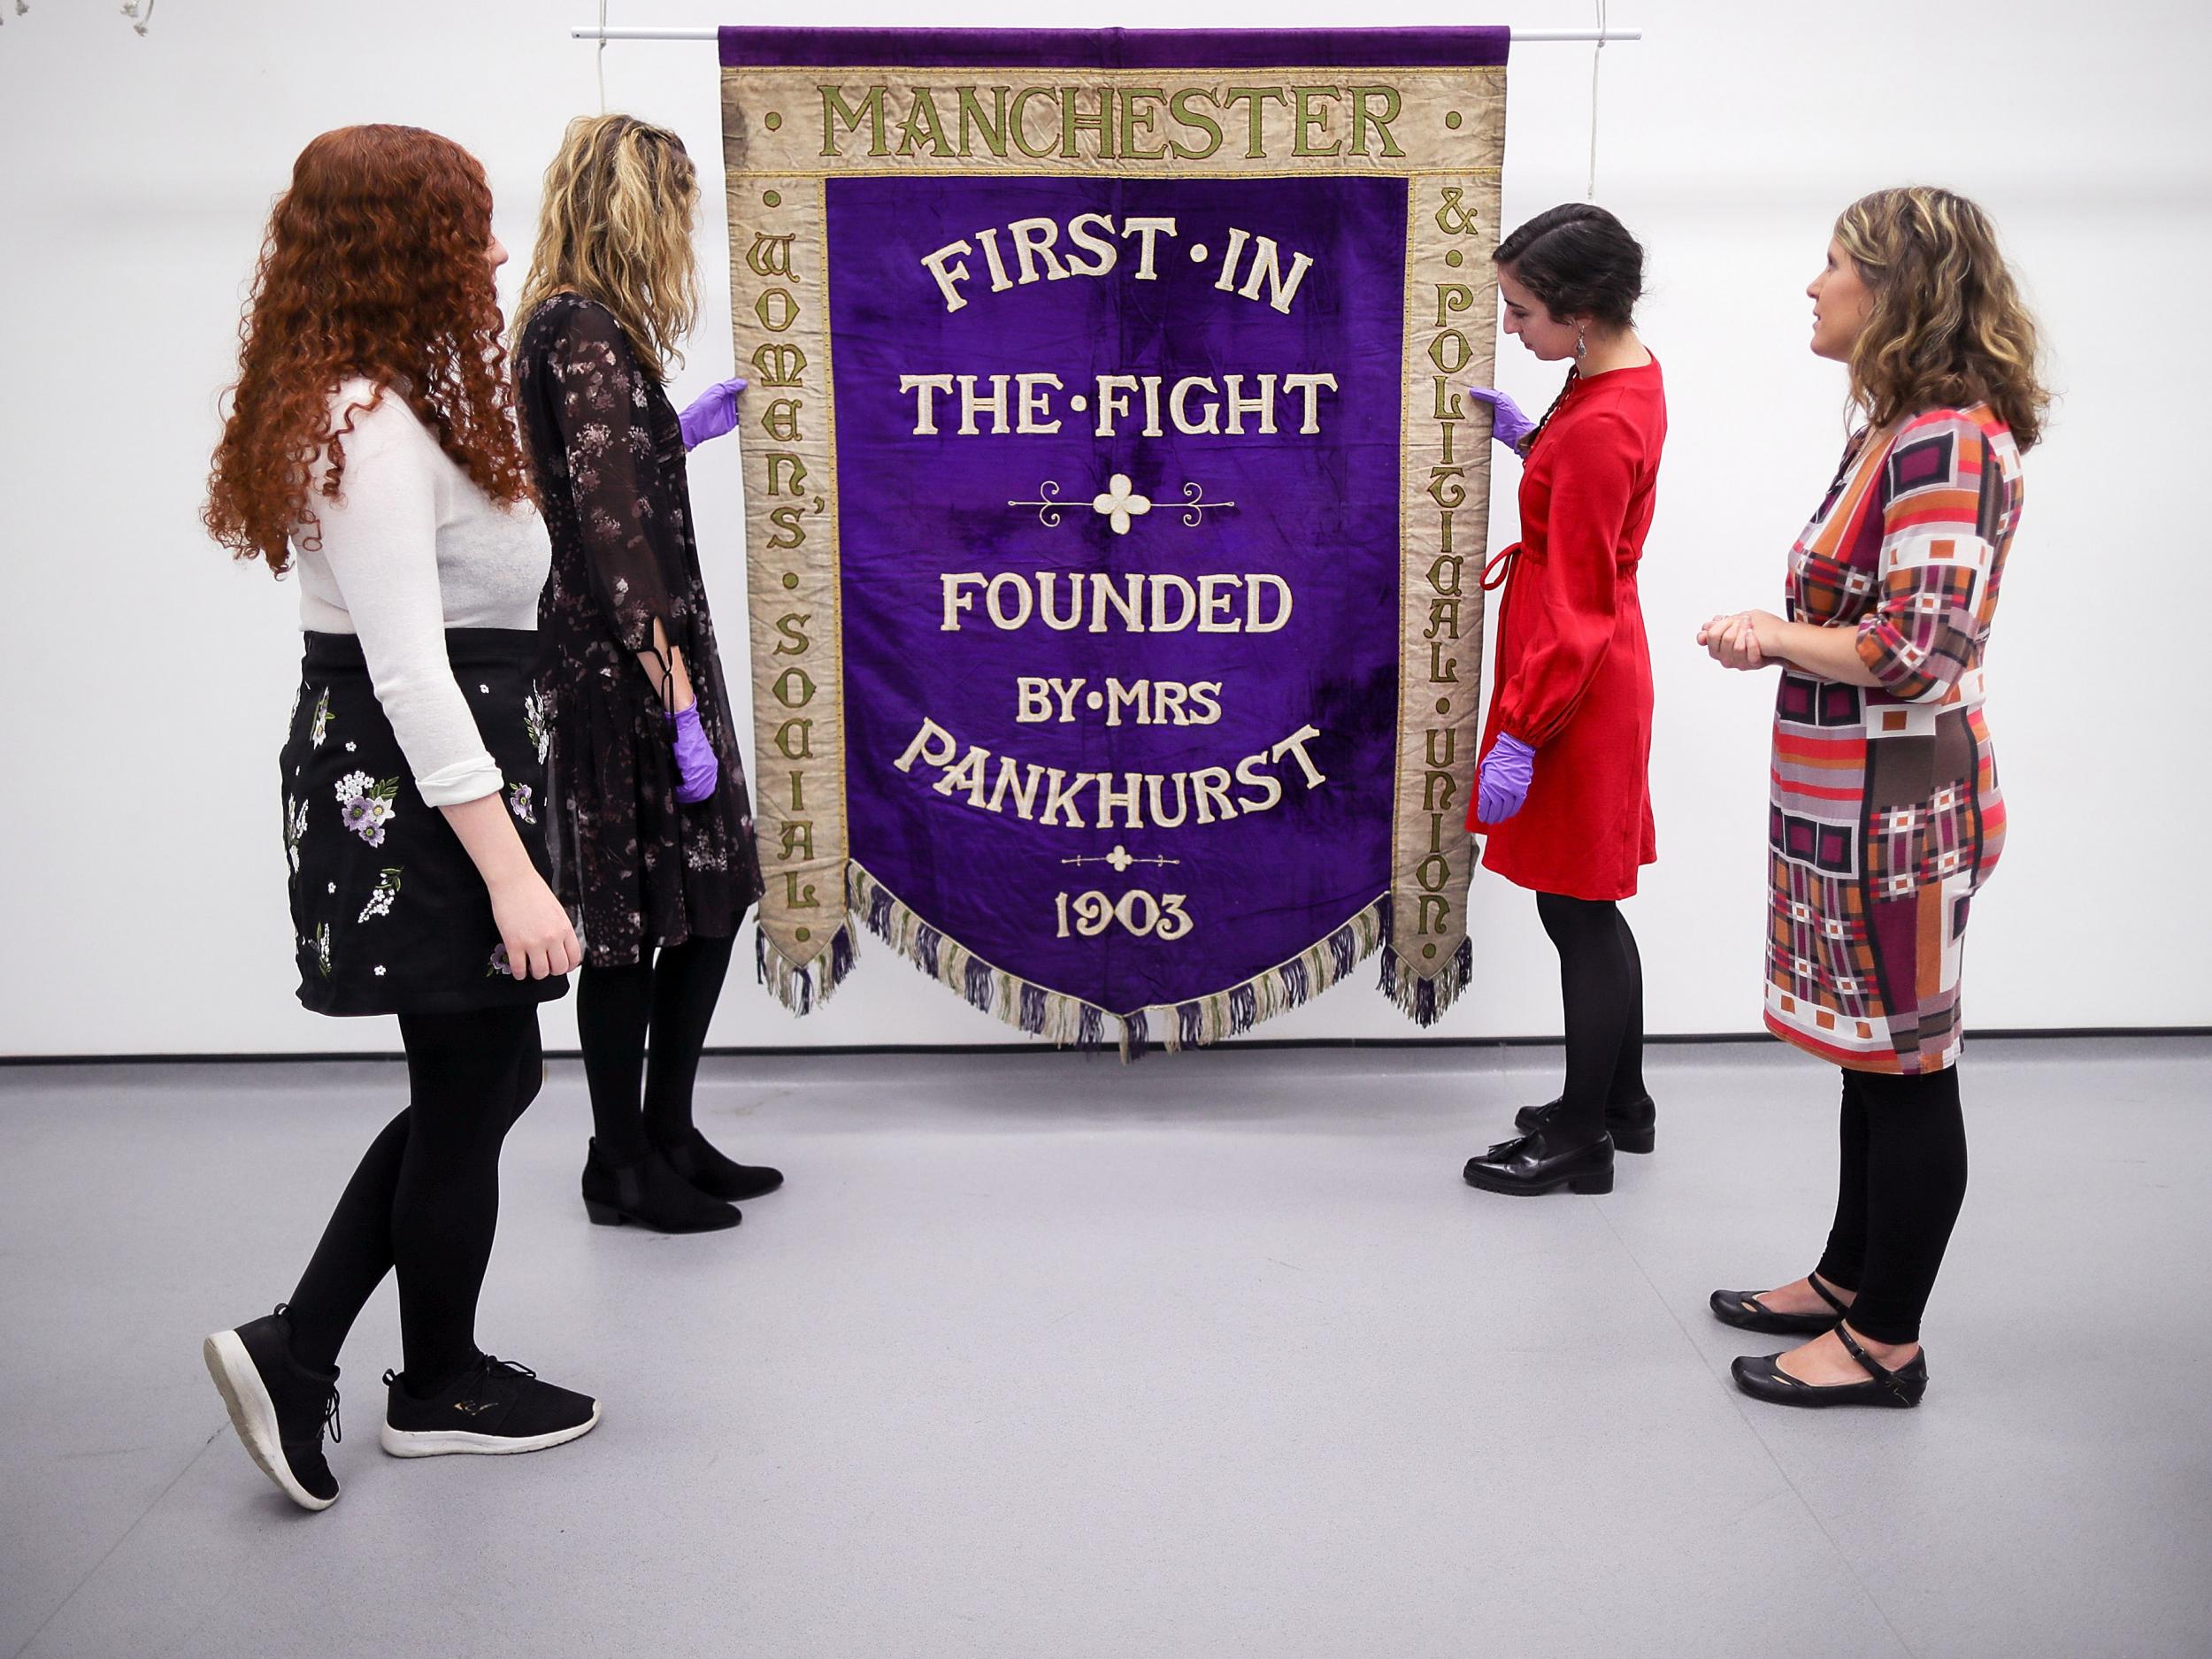 Conservators and museum staff pose as they inspect the Manchester suffragette banner hanging in the conservation department of Manchester People's History Museum. For nearly 50 years the banner lay undiscovered in a Leeds charity shop